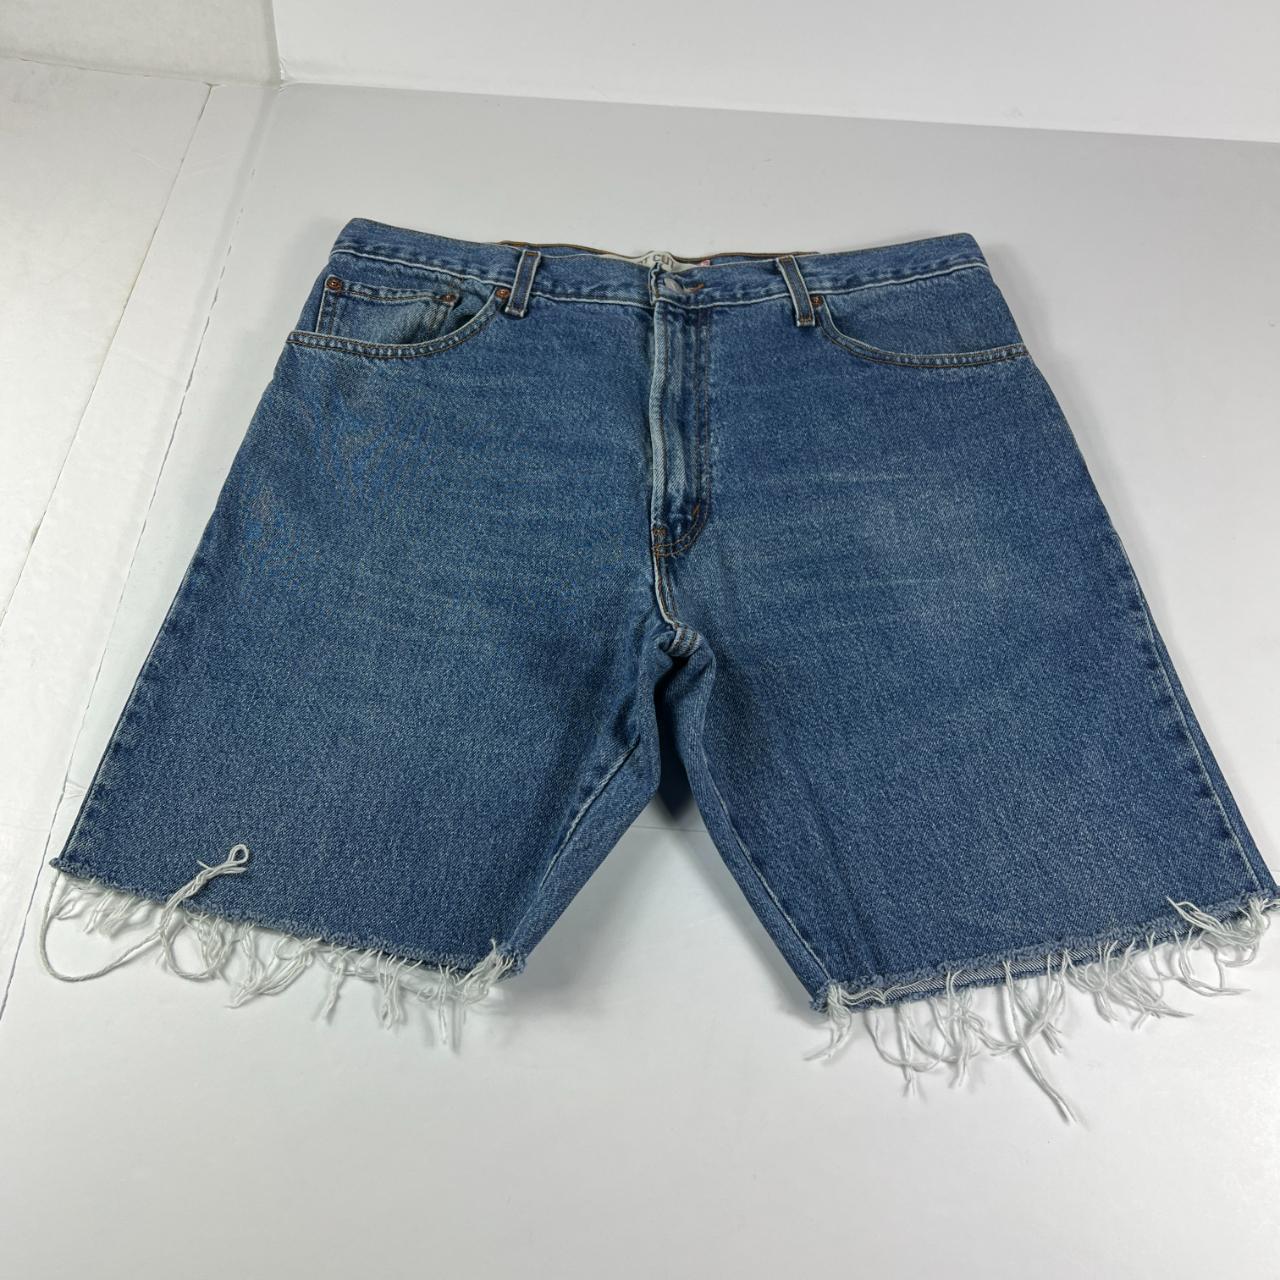 Retro 80's Shorts: 80s -Levis- Mens light blue cotton denim cut off jean  shorts with button/zip front closure, classic four pocket styling and small  e orange tag along rear left patch pocket.